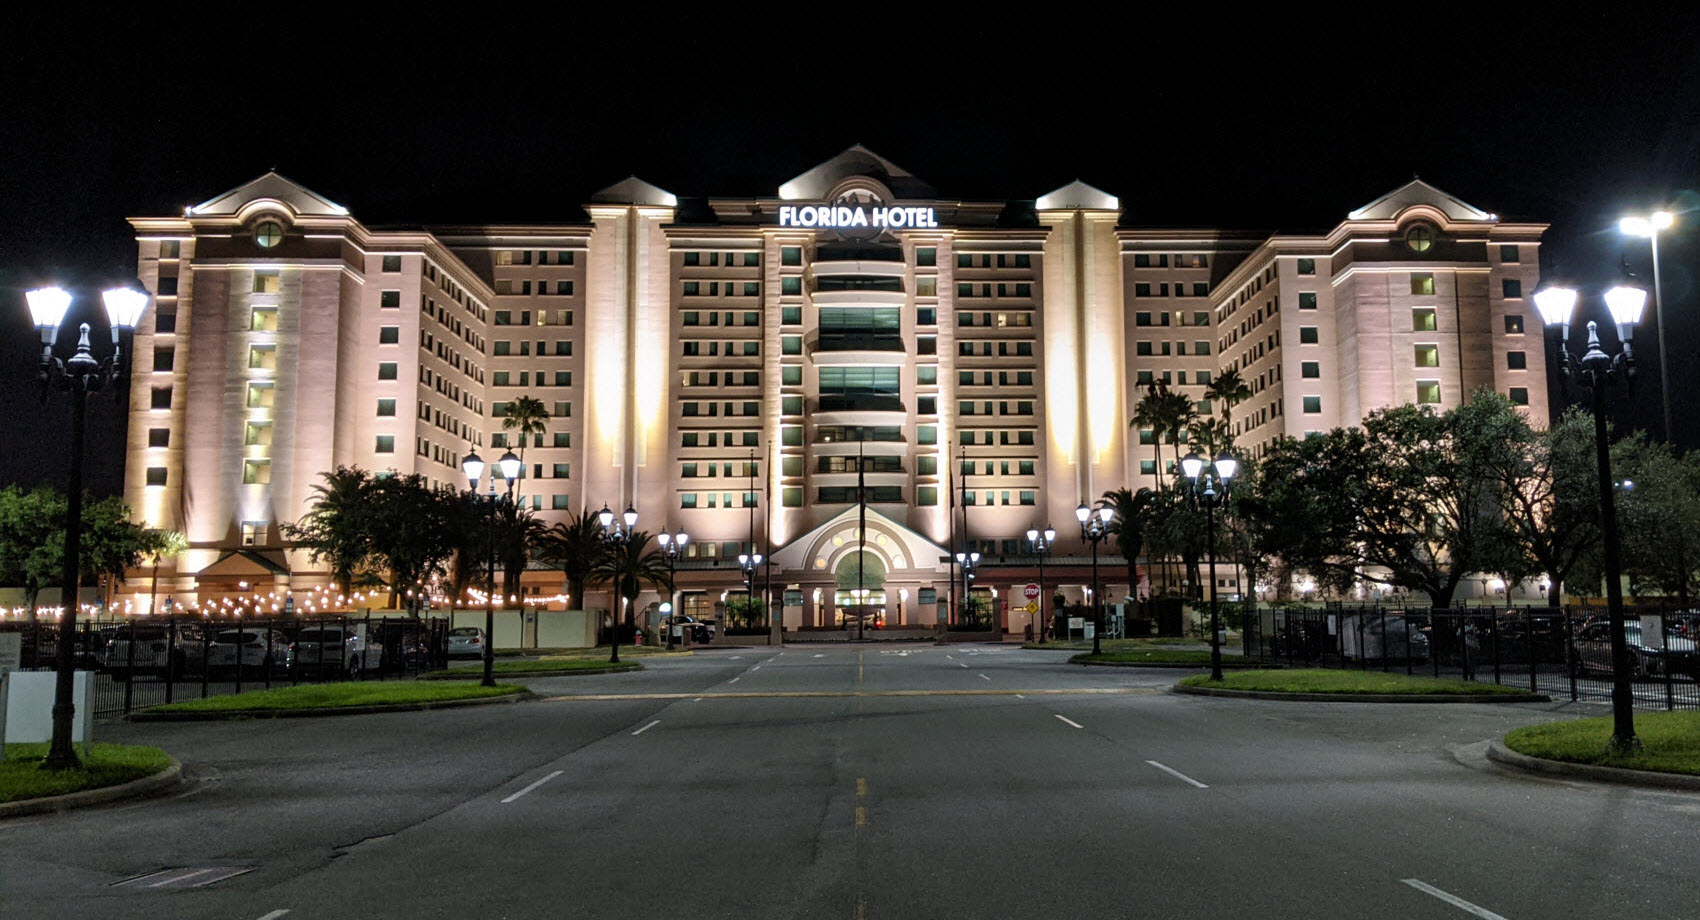 The Florida Hotel and Conference Center in Orlando